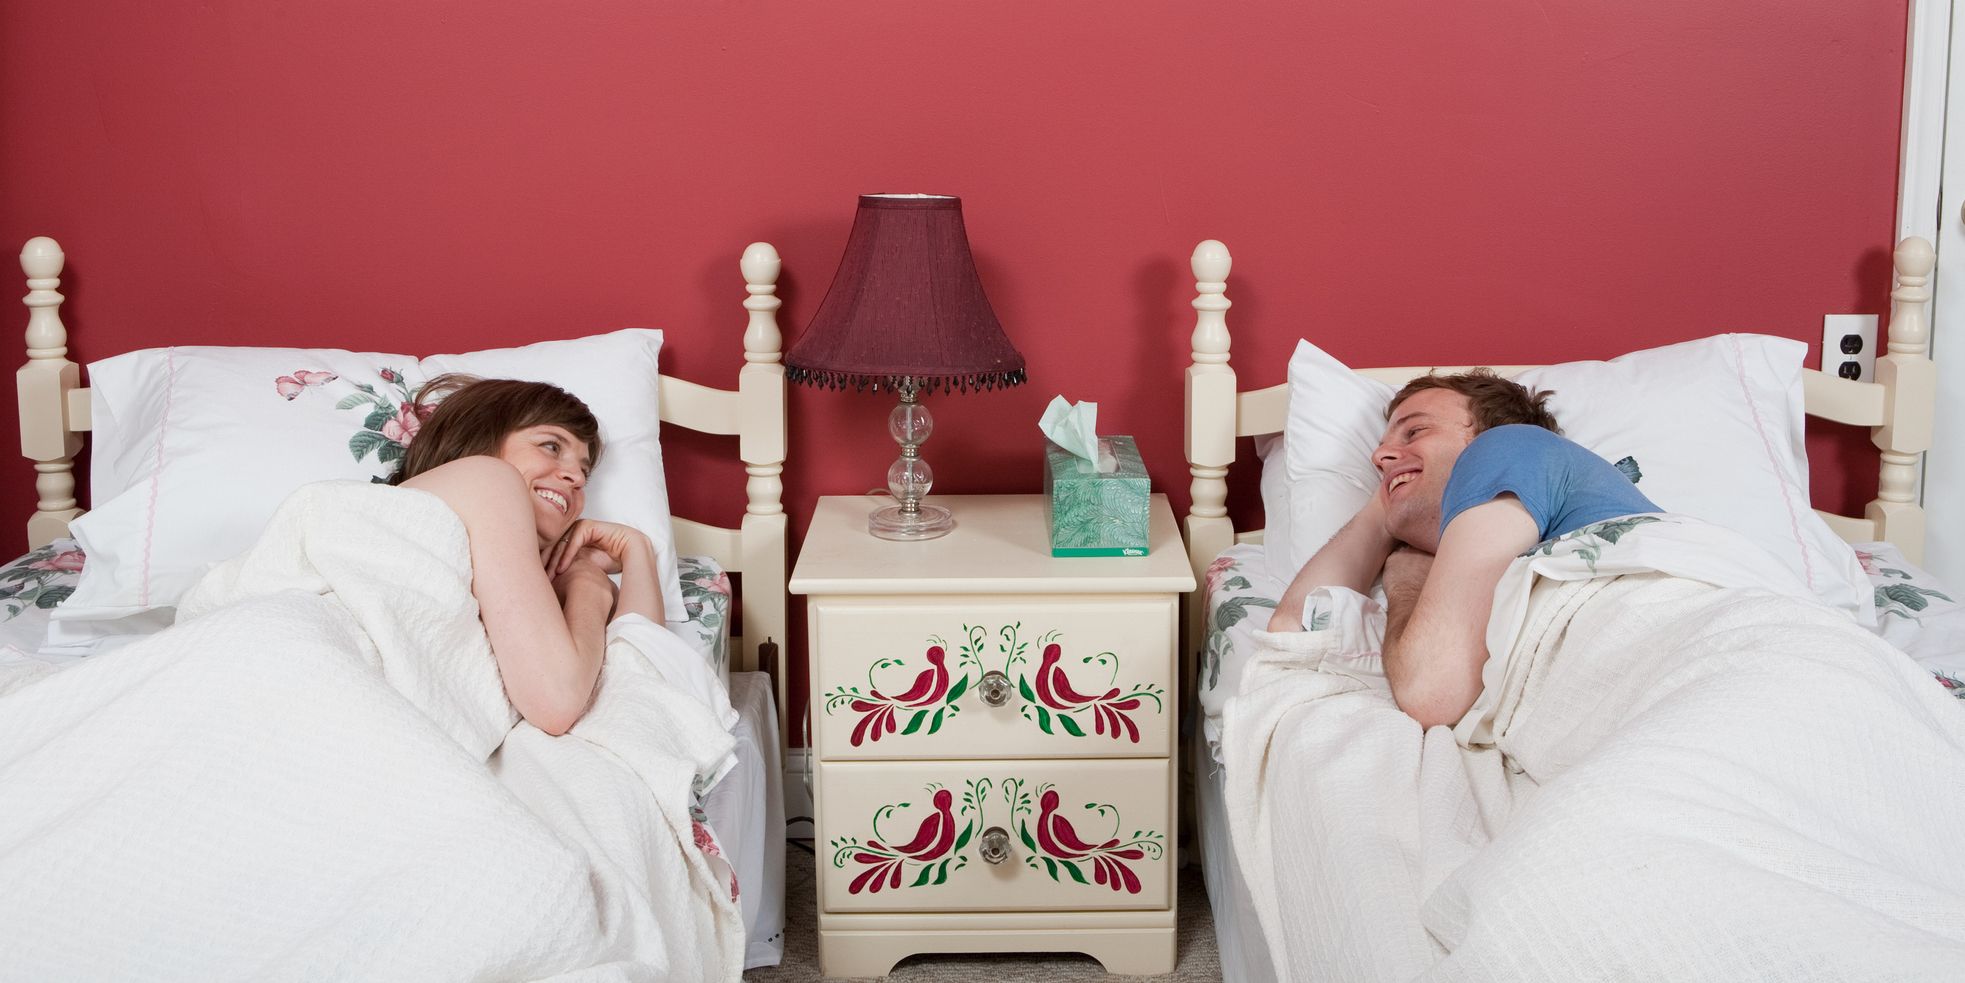 Couples sleeping in separate bedrooms: How to talk to kids about it